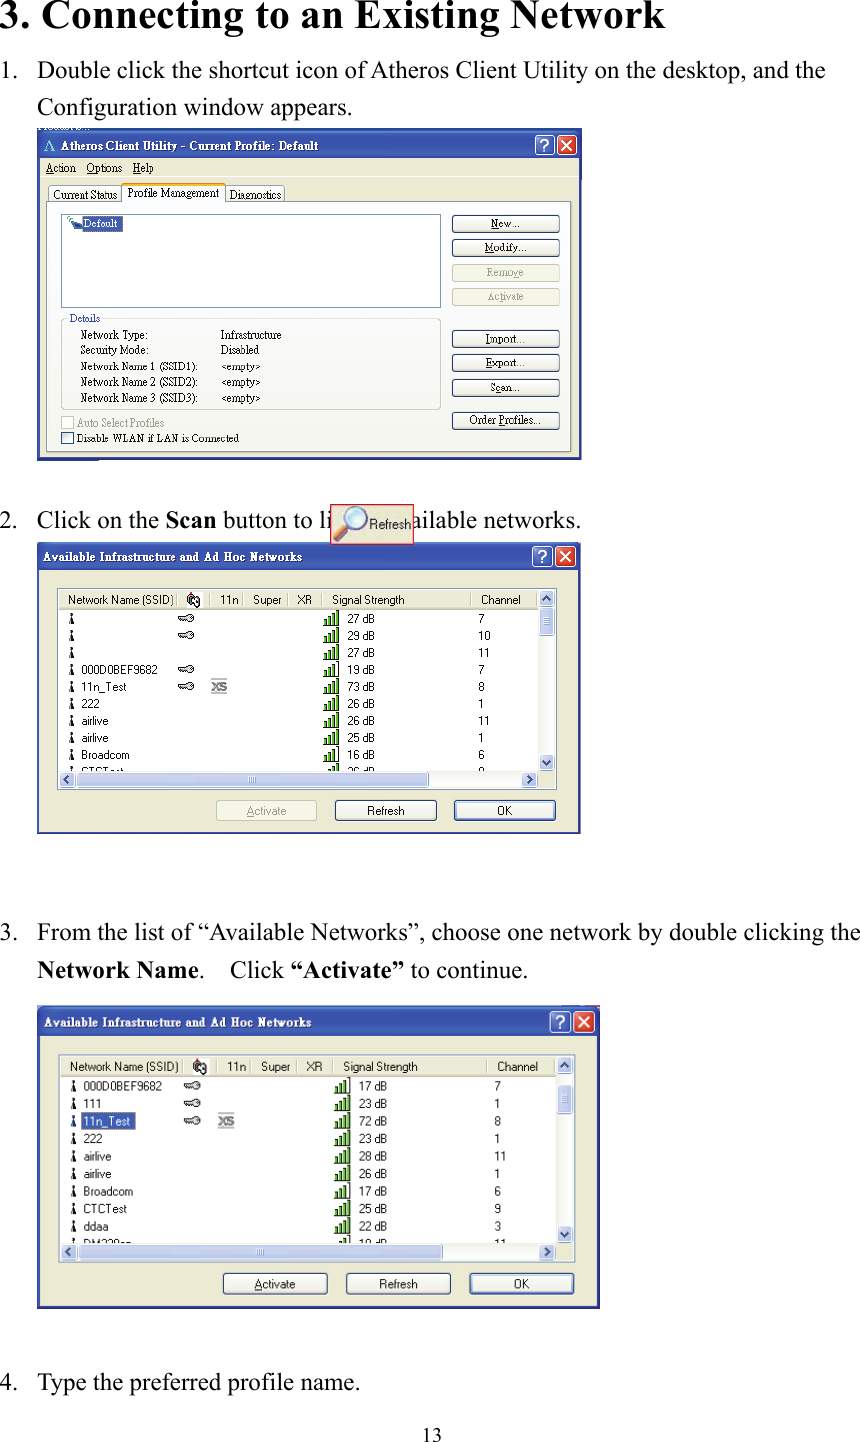  13 3. Connecting to an Existing Network 1.  Double click the shortcut icon of Atheros Client Utility on the desktop, and the Configuration window appears.   2.  Click on the Scan button to list all available networks.    3.  From the list of “Available Networks”, choose one network by double clicking the Network Name.  Click “Activate” to continue.   4.  Type the preferred profile name. 